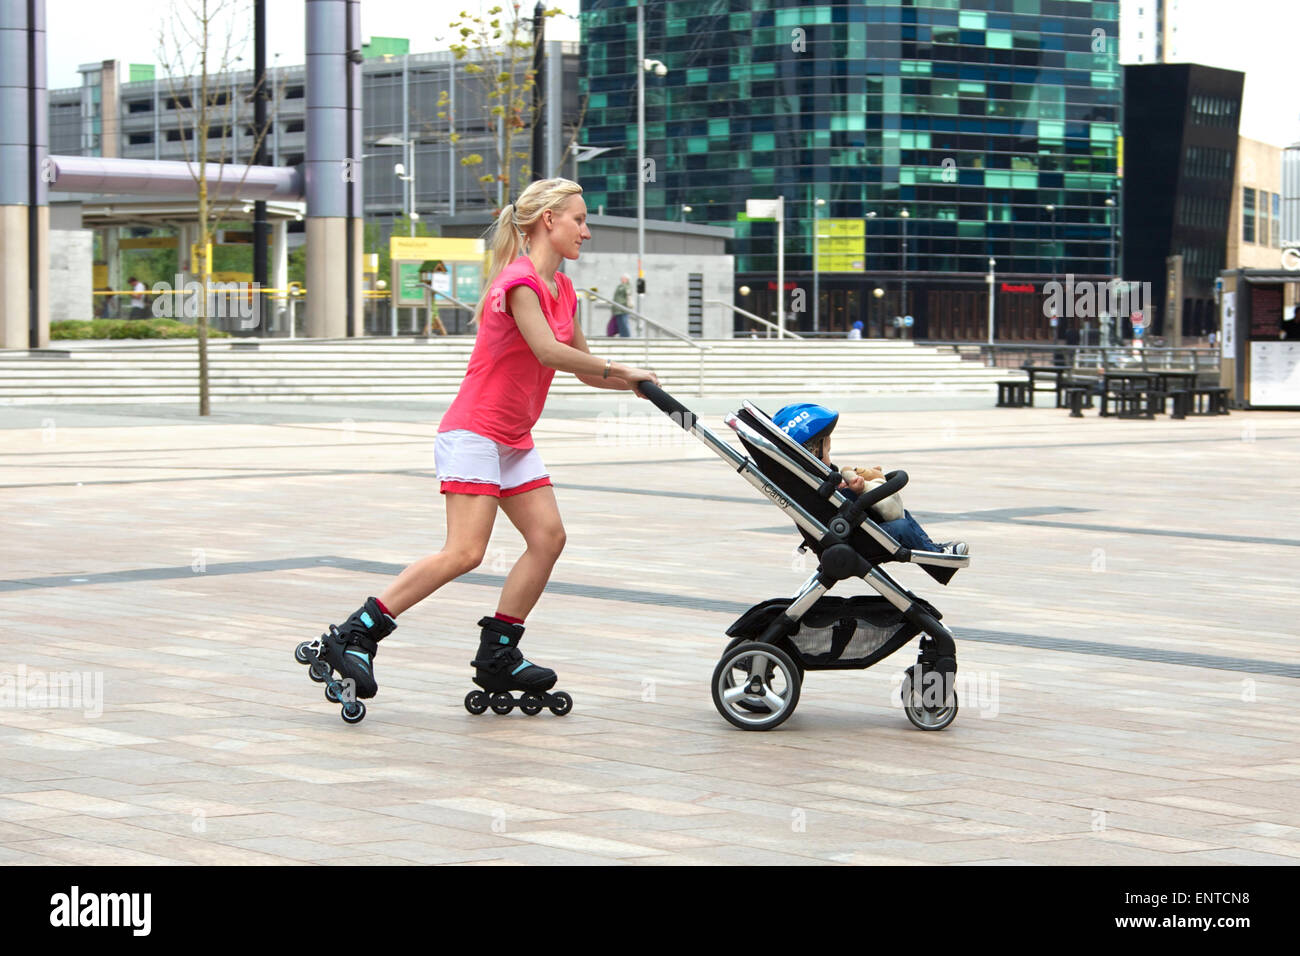 Young woman roller-skating with her child in a push-chair, Media City, Salford, England Stock Photo